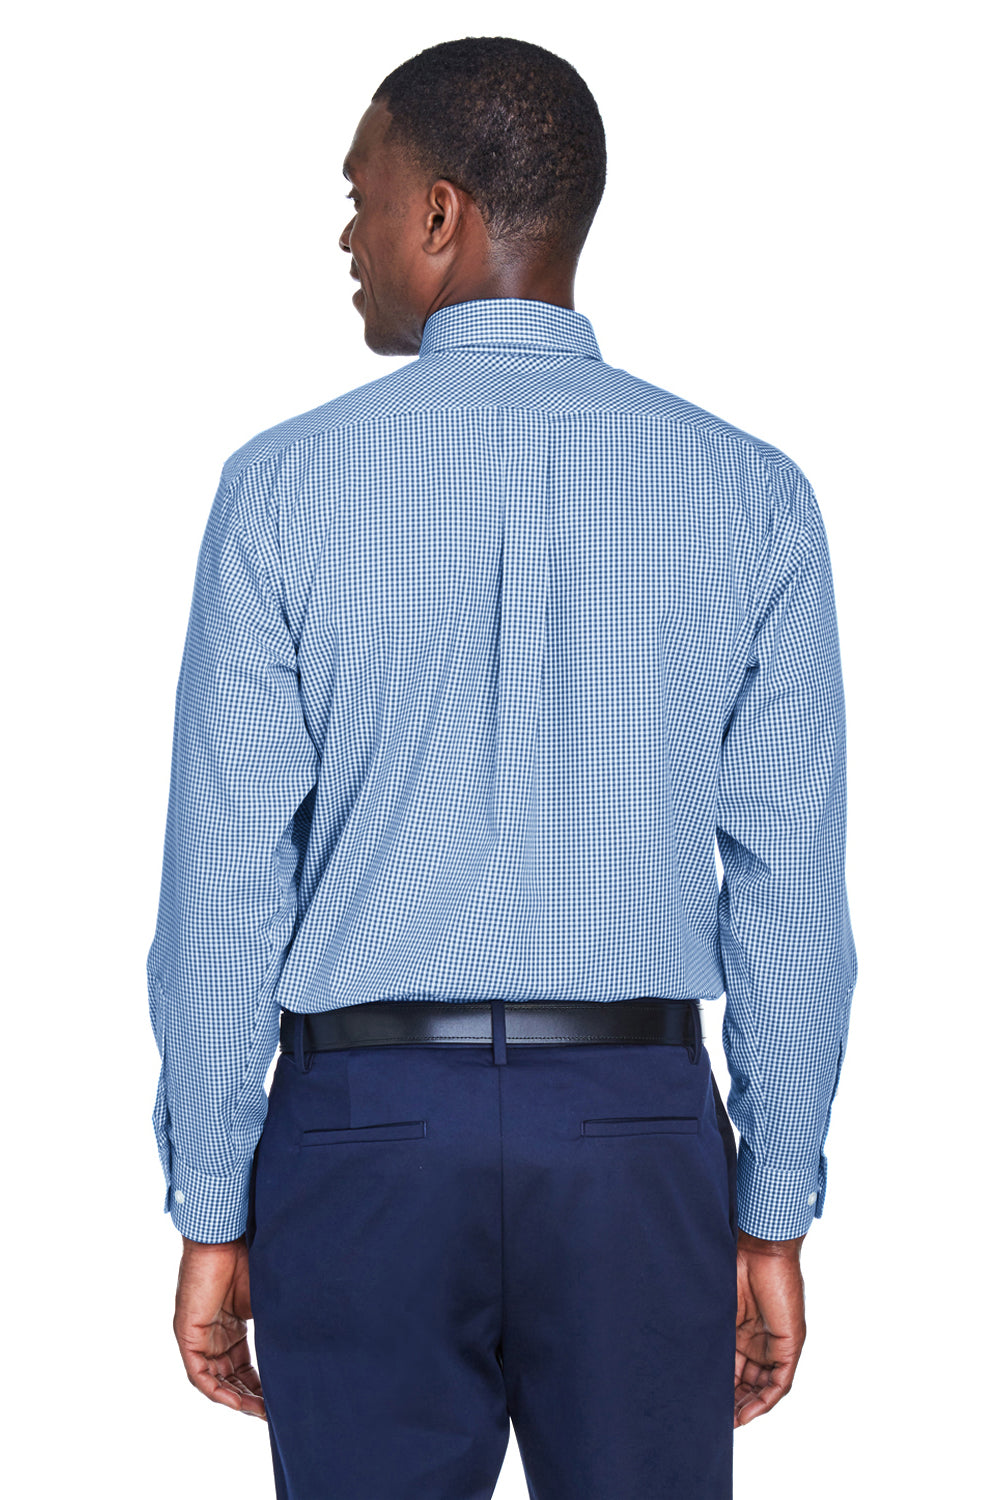 Devon & Jones D640 Mens Crown Woven Collection Wrinkle Resistant Long Sleeve Button Down Shirt w/ Pocket French Blue Back